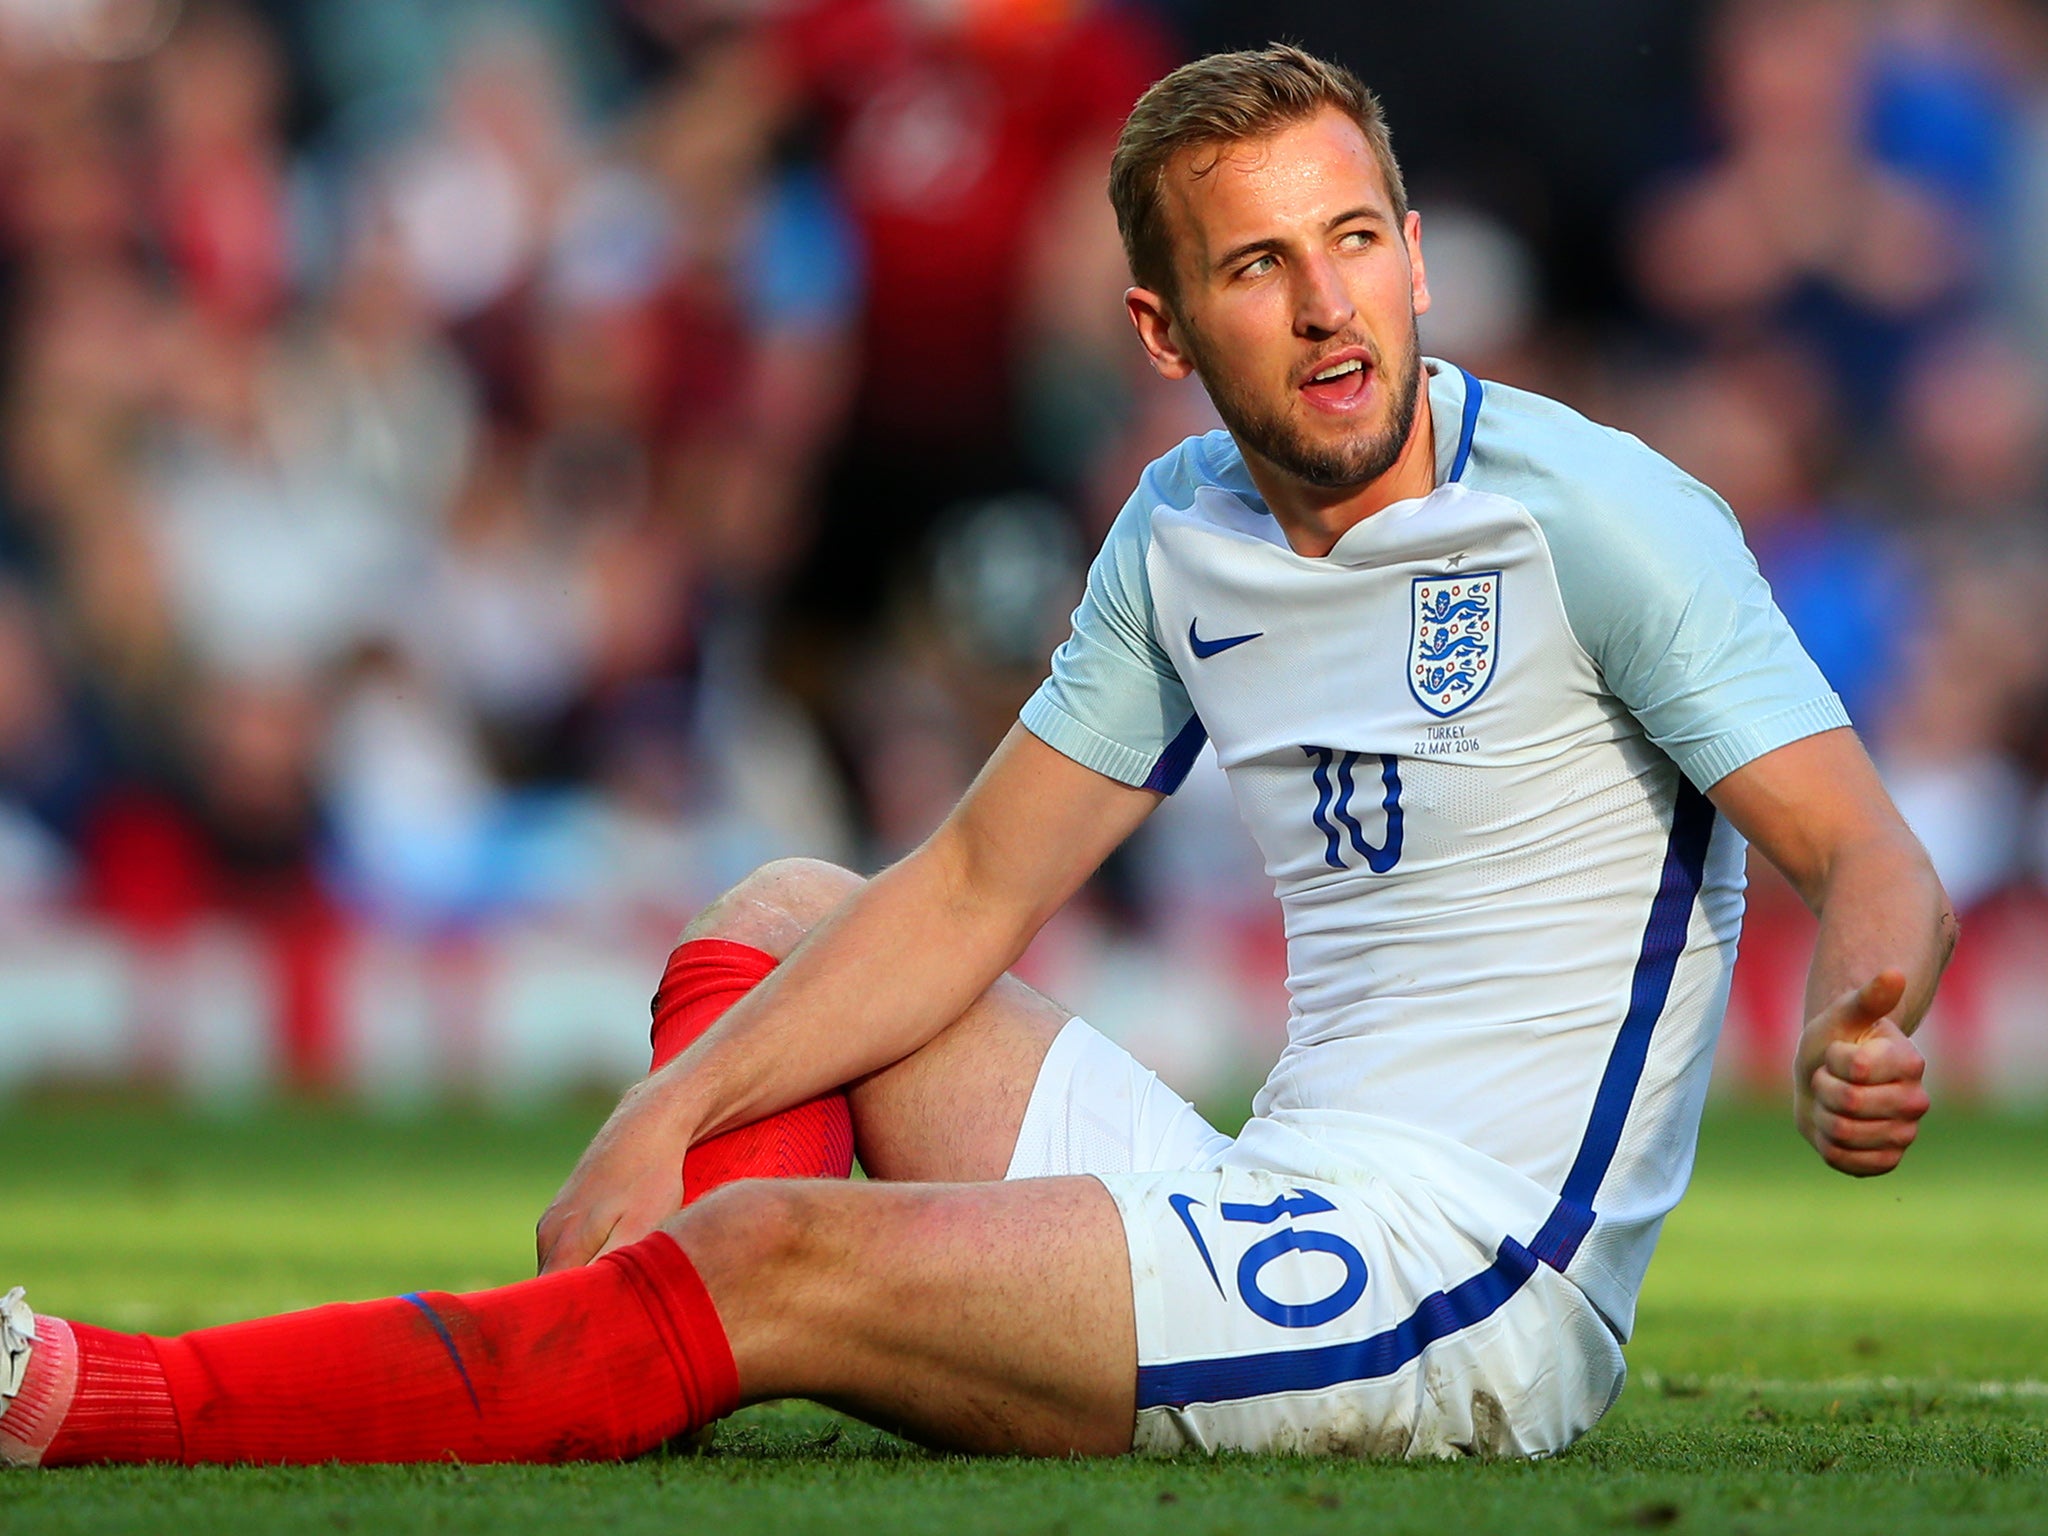 Kane was one of five Tottenham players in Hodgson's starting line-up